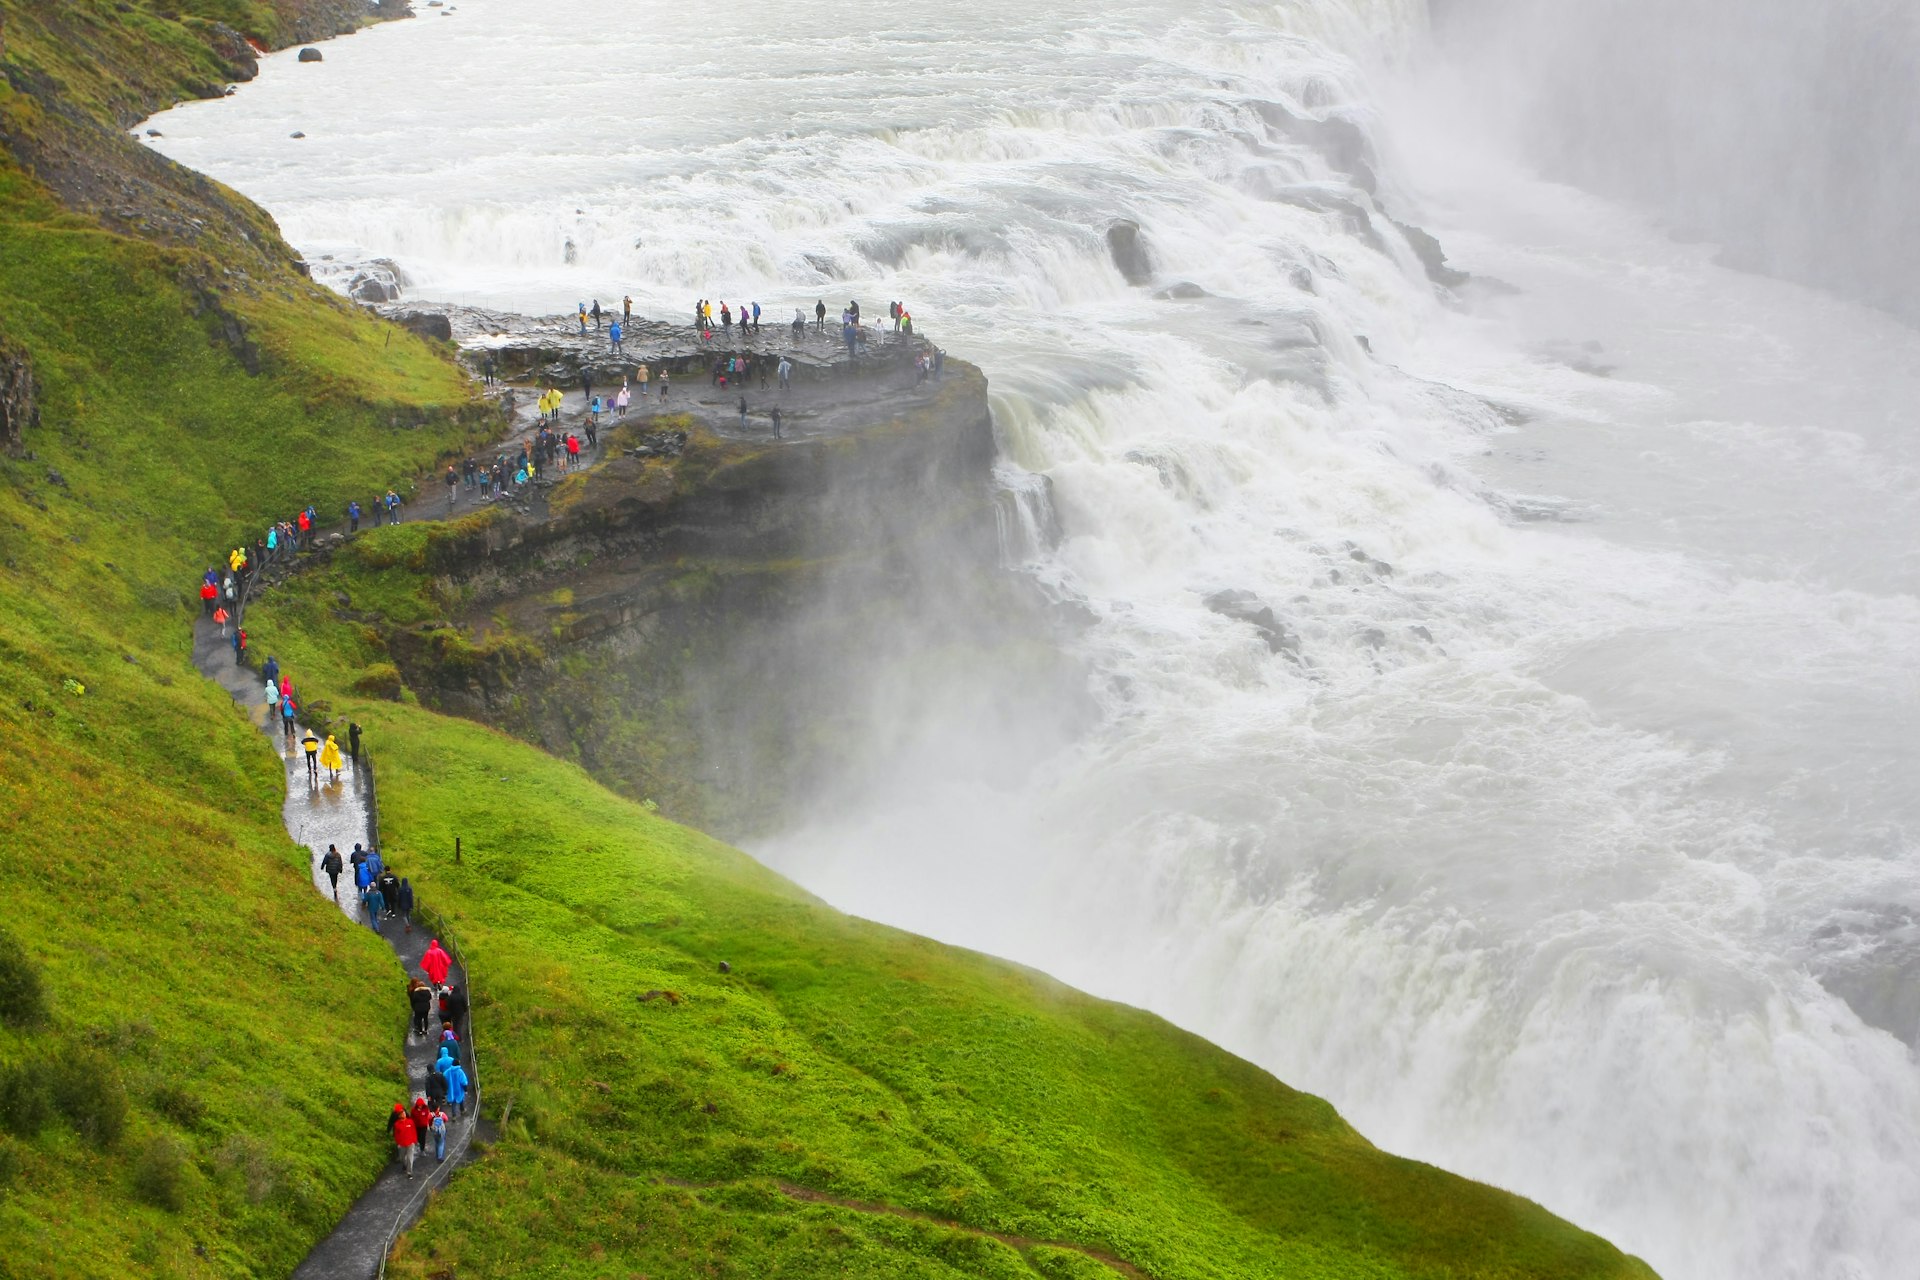 Visitors walking along a dirt path at the Cascades of Gullfoss waterfall, seen from above